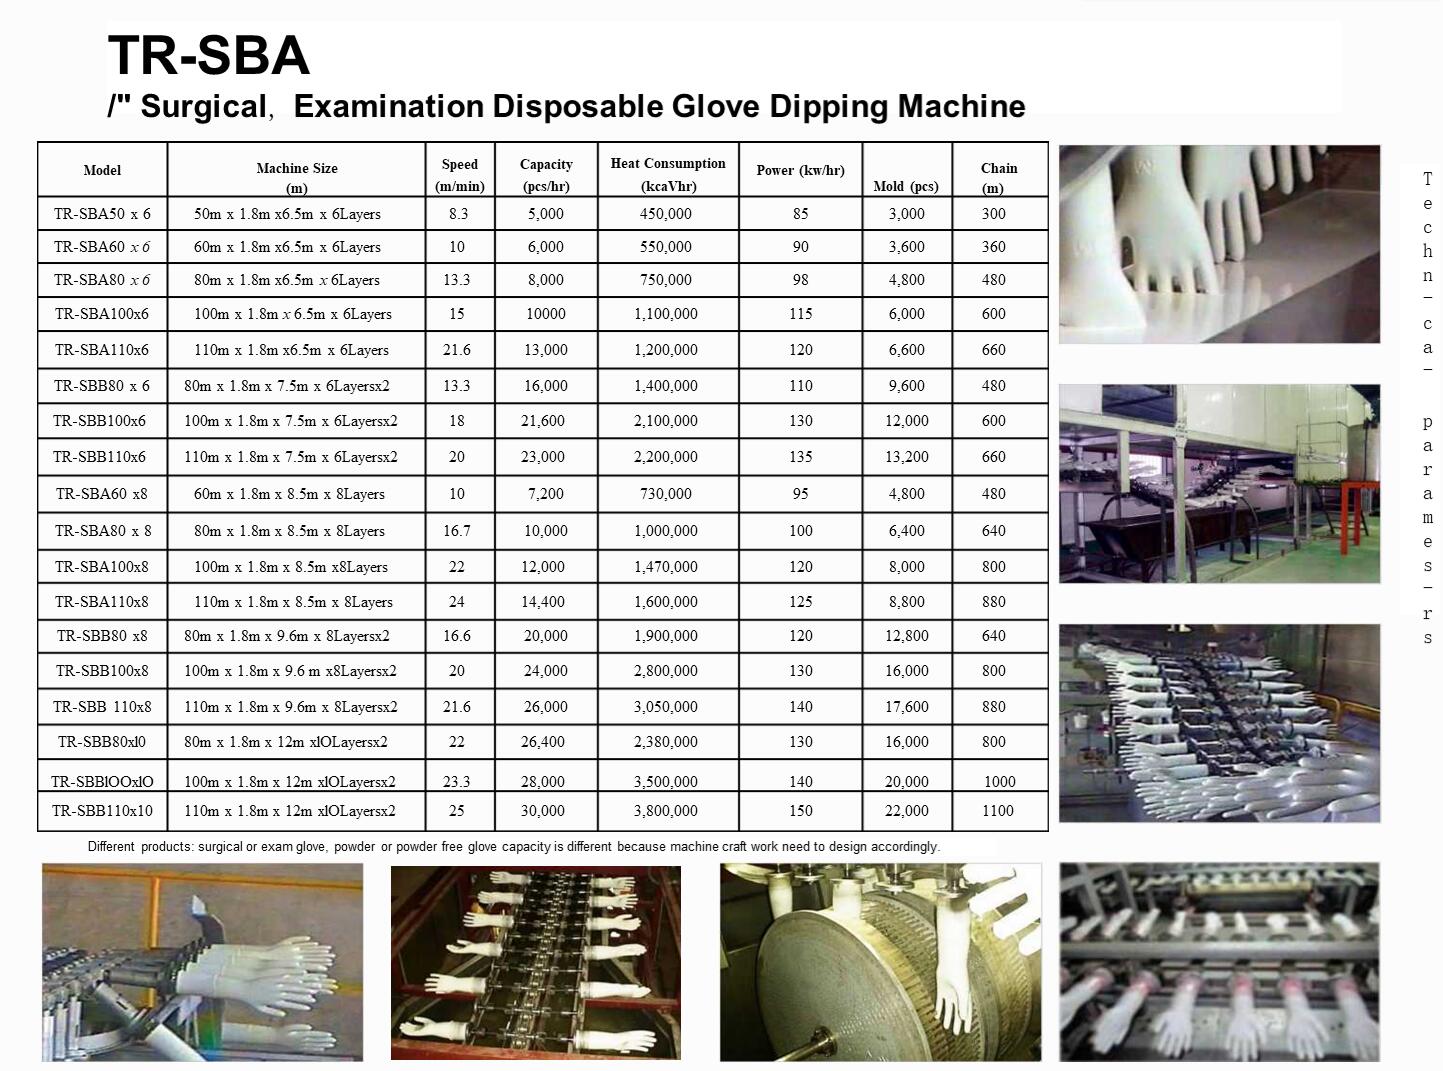 Disposable glove dipping machine